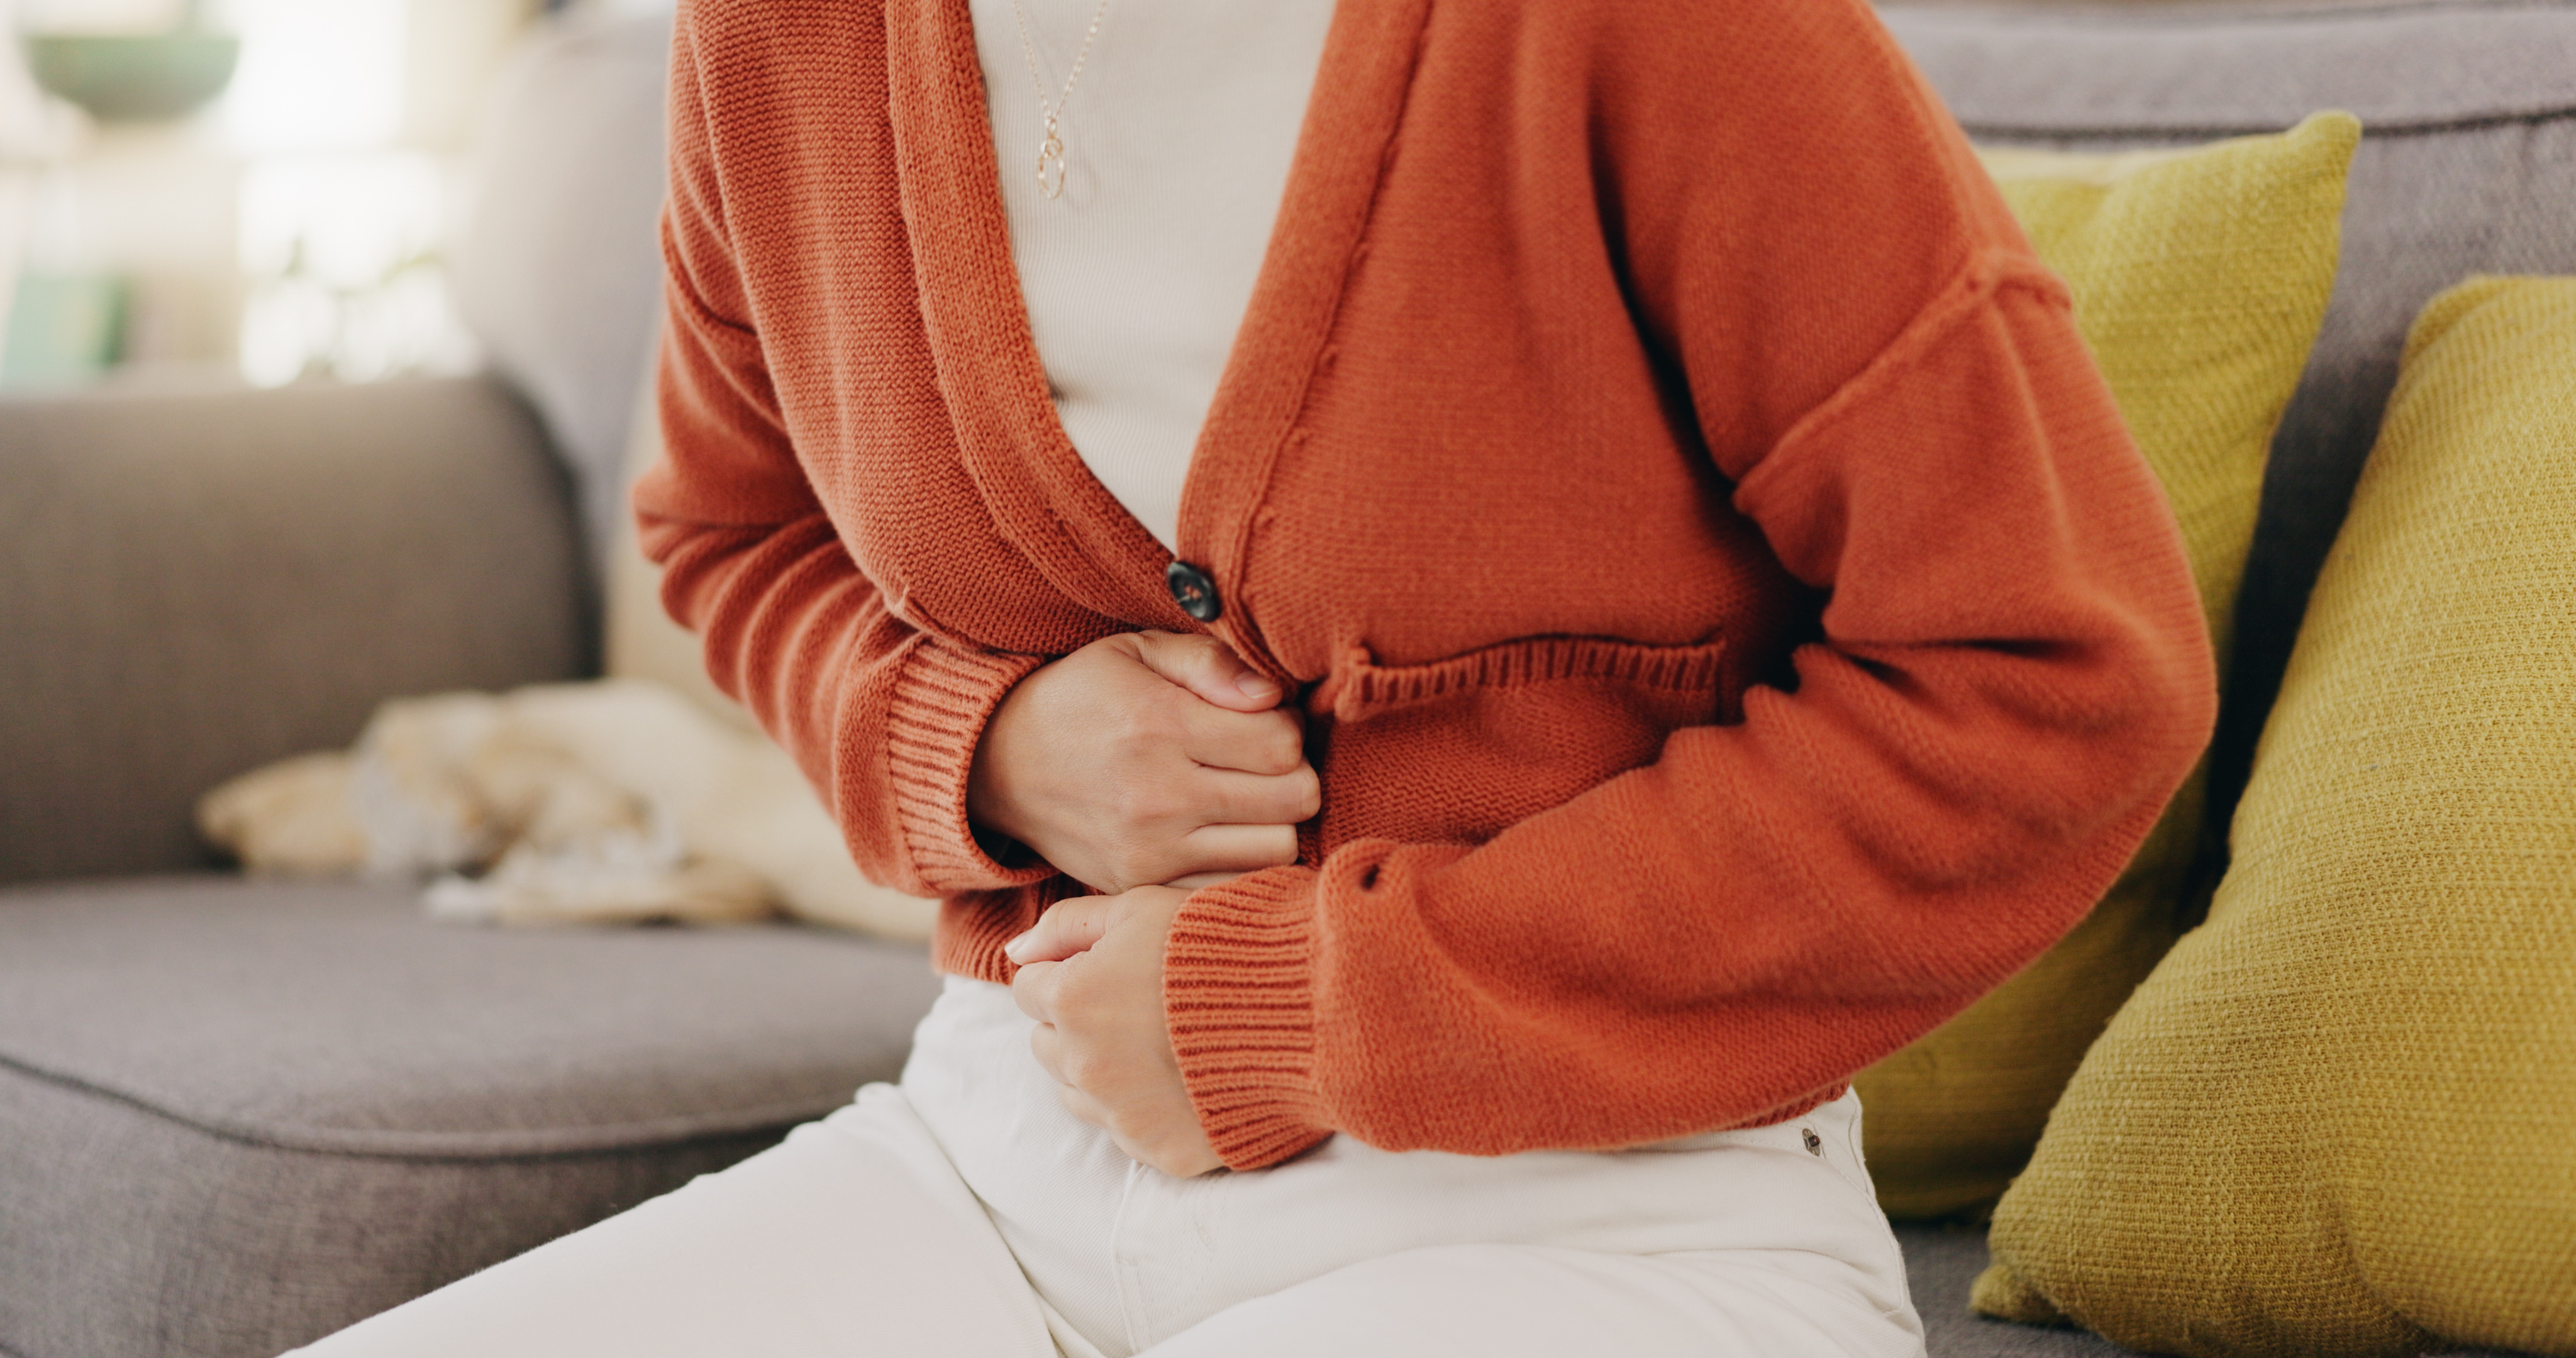 A woman experiencing stomach pain - learn how you can find relief with Vida-Flo's IV hydration treatment for gastrointestinal diseases in Brookhaven, GA.